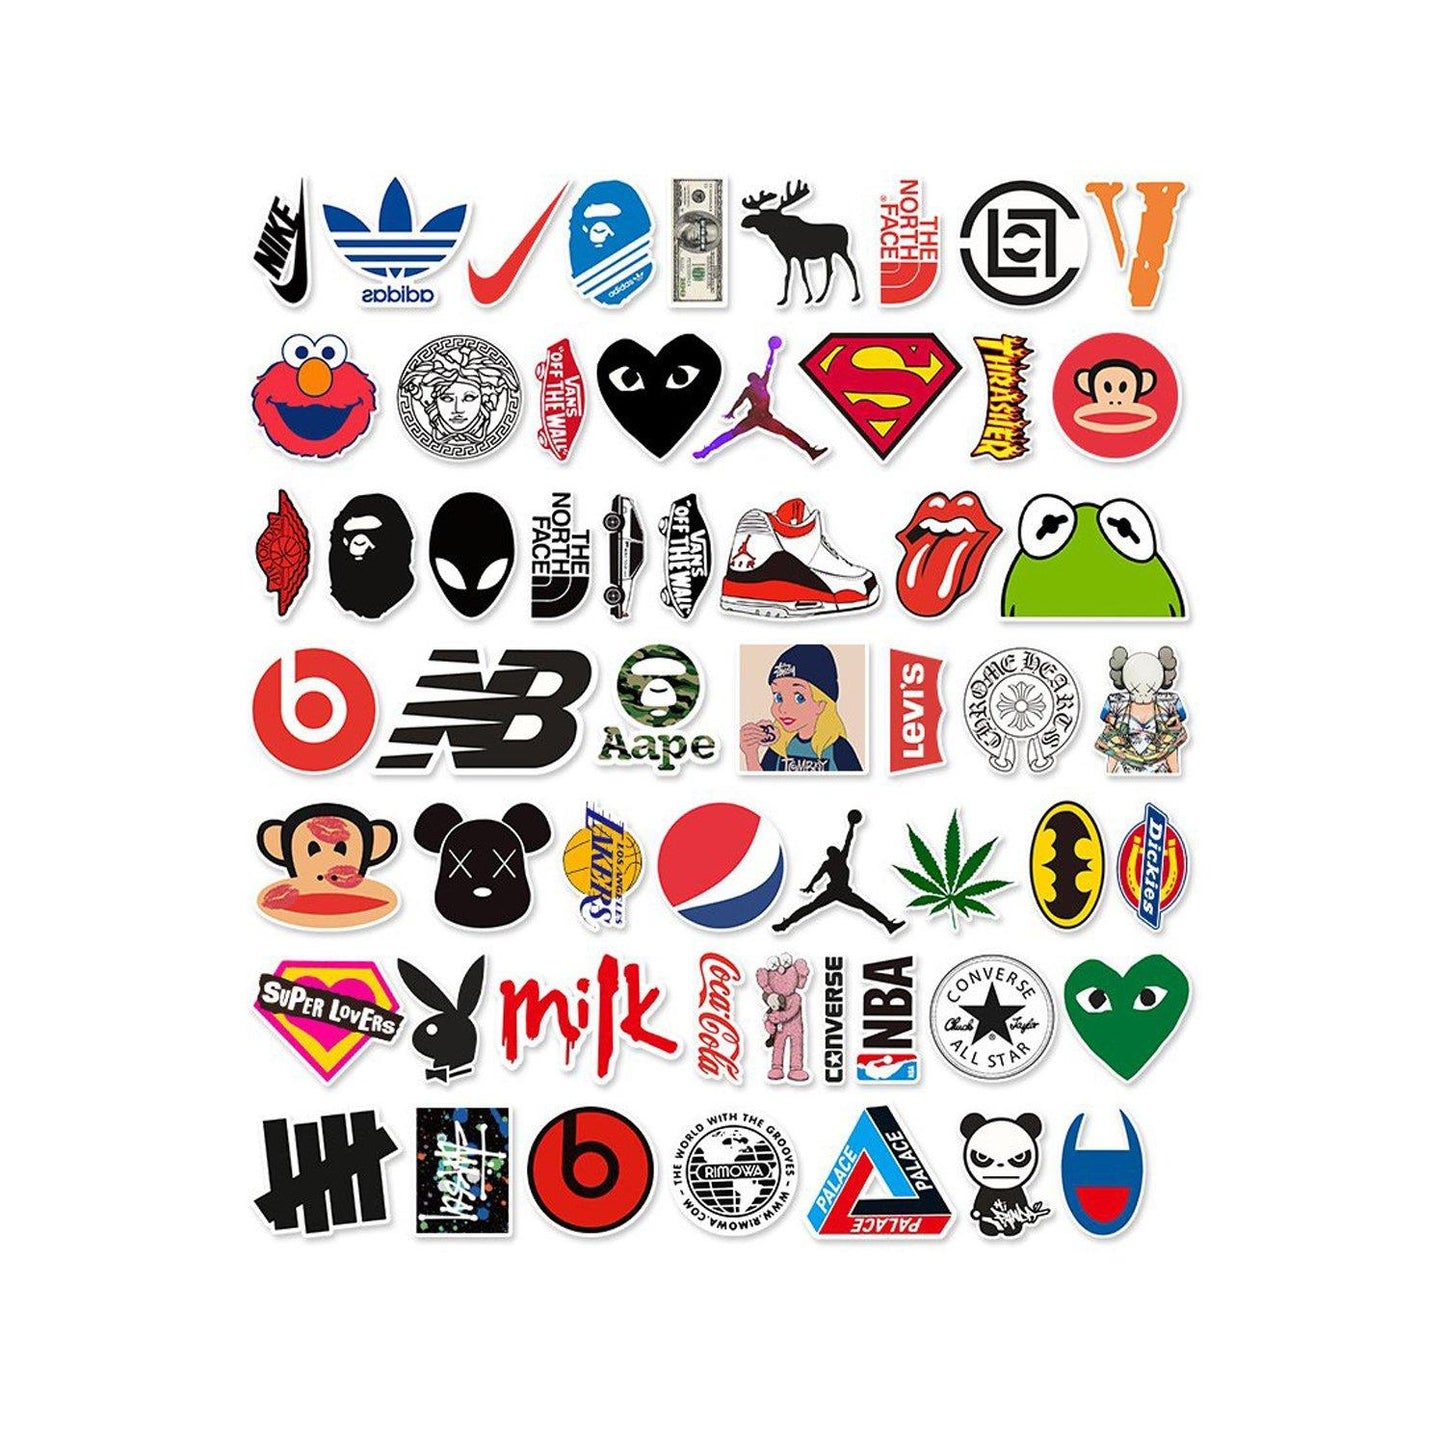 Street Fashion Brands Logo Vinyls Stickers PackDecals - StiCool